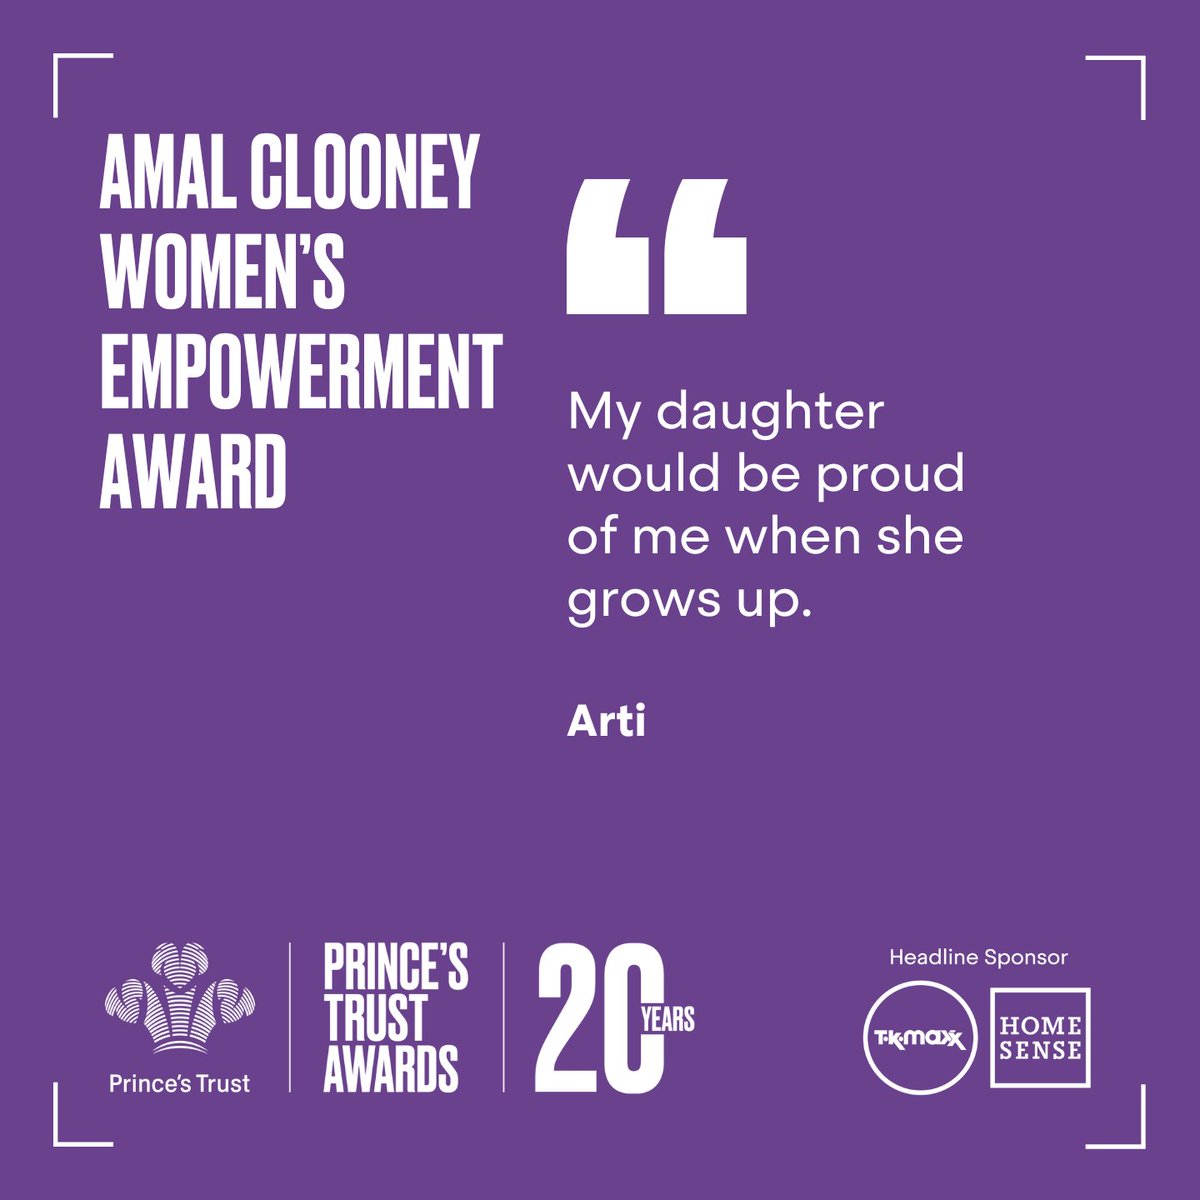 The Amal Clooney Women’s Empowerment Award, sponsored by @CTilburyMakeup, winner is Arti! 🏆 🎉 Supported by @KingsTrustInt, Arti has broken the mould to become one of the first pink rickshaw drivers in Uttar Pradesh, India, providing safe transport for other women.